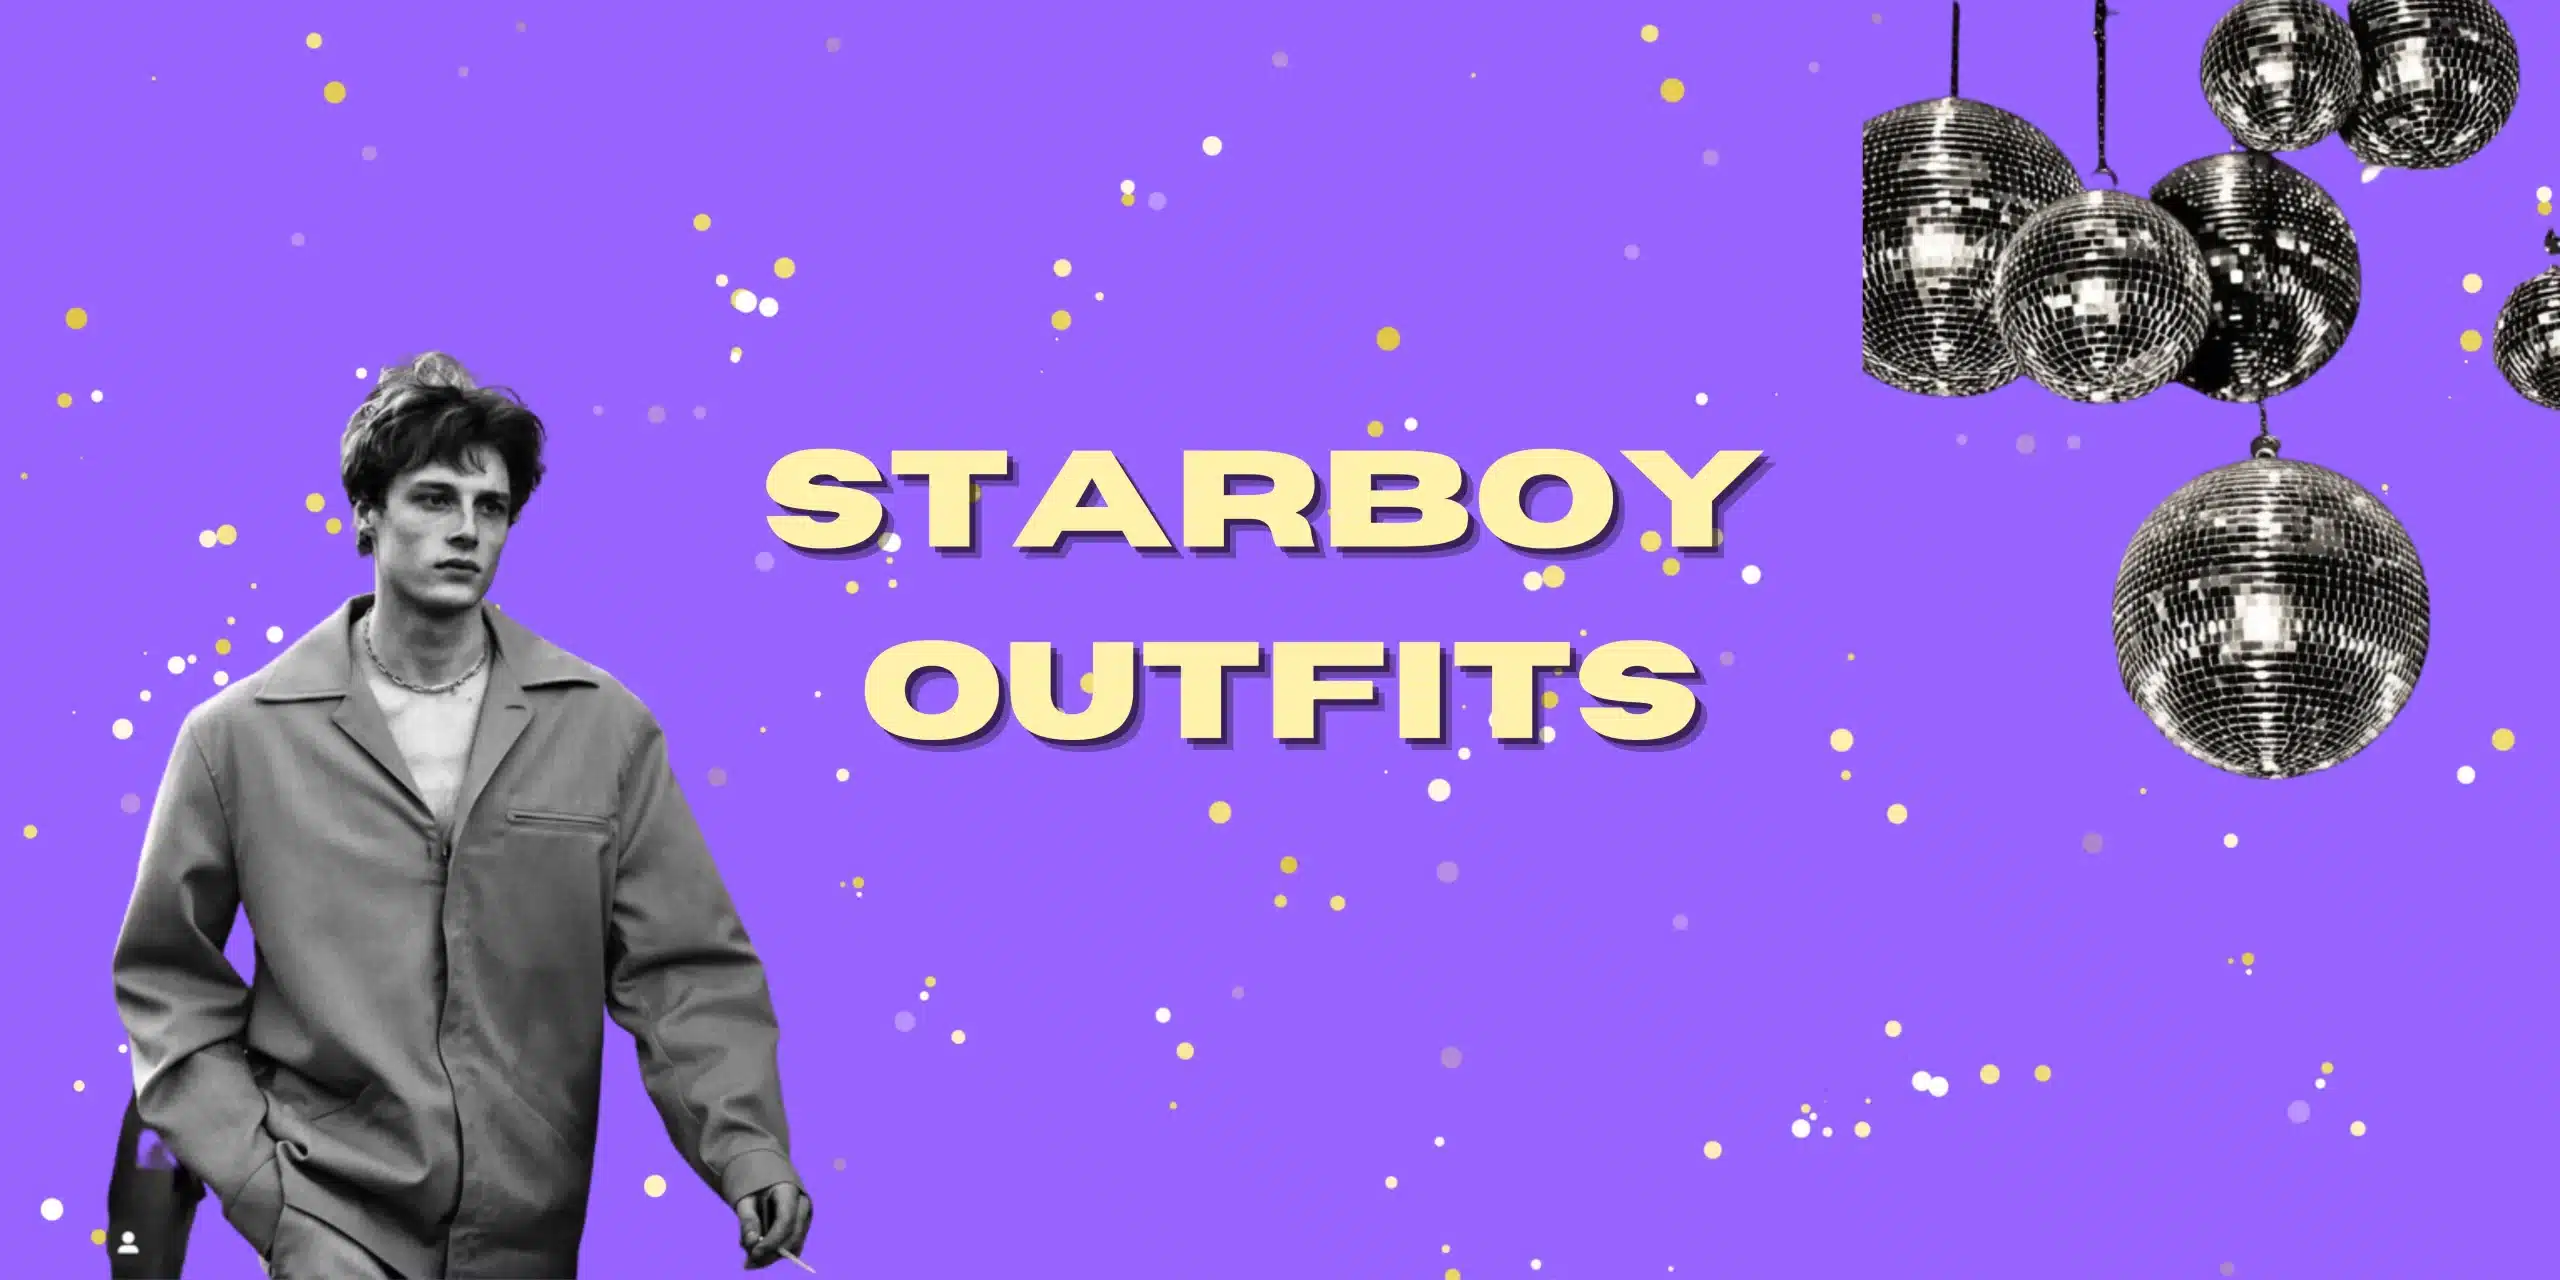 Starboy Outfits for Fall – 5 Outfit Ideas for the Starboy Aesthetic